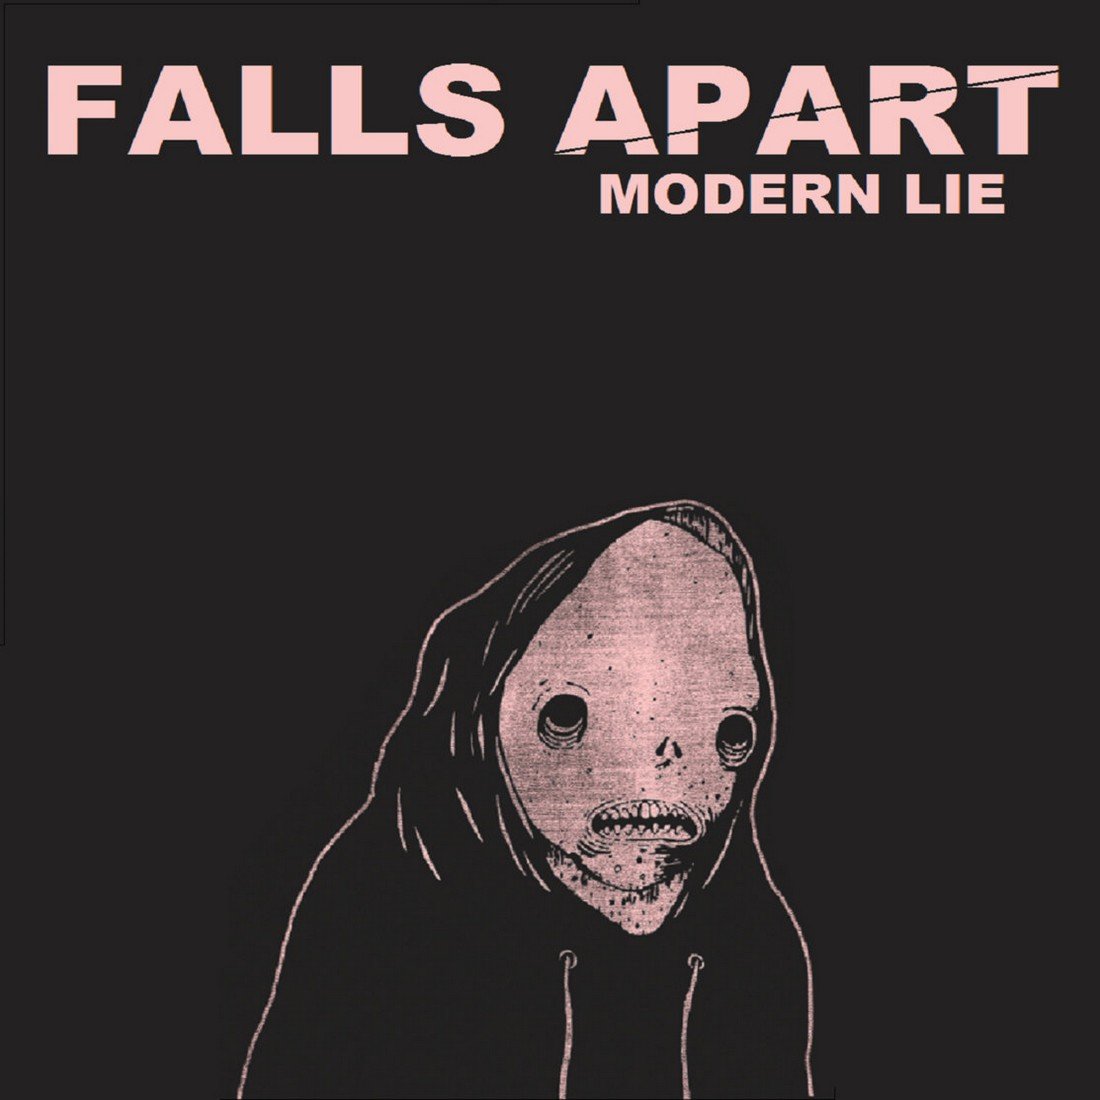 Fall Apart картинки. Falls Apart. Mesh the point at which it Falls Apart. Lain is Falling.